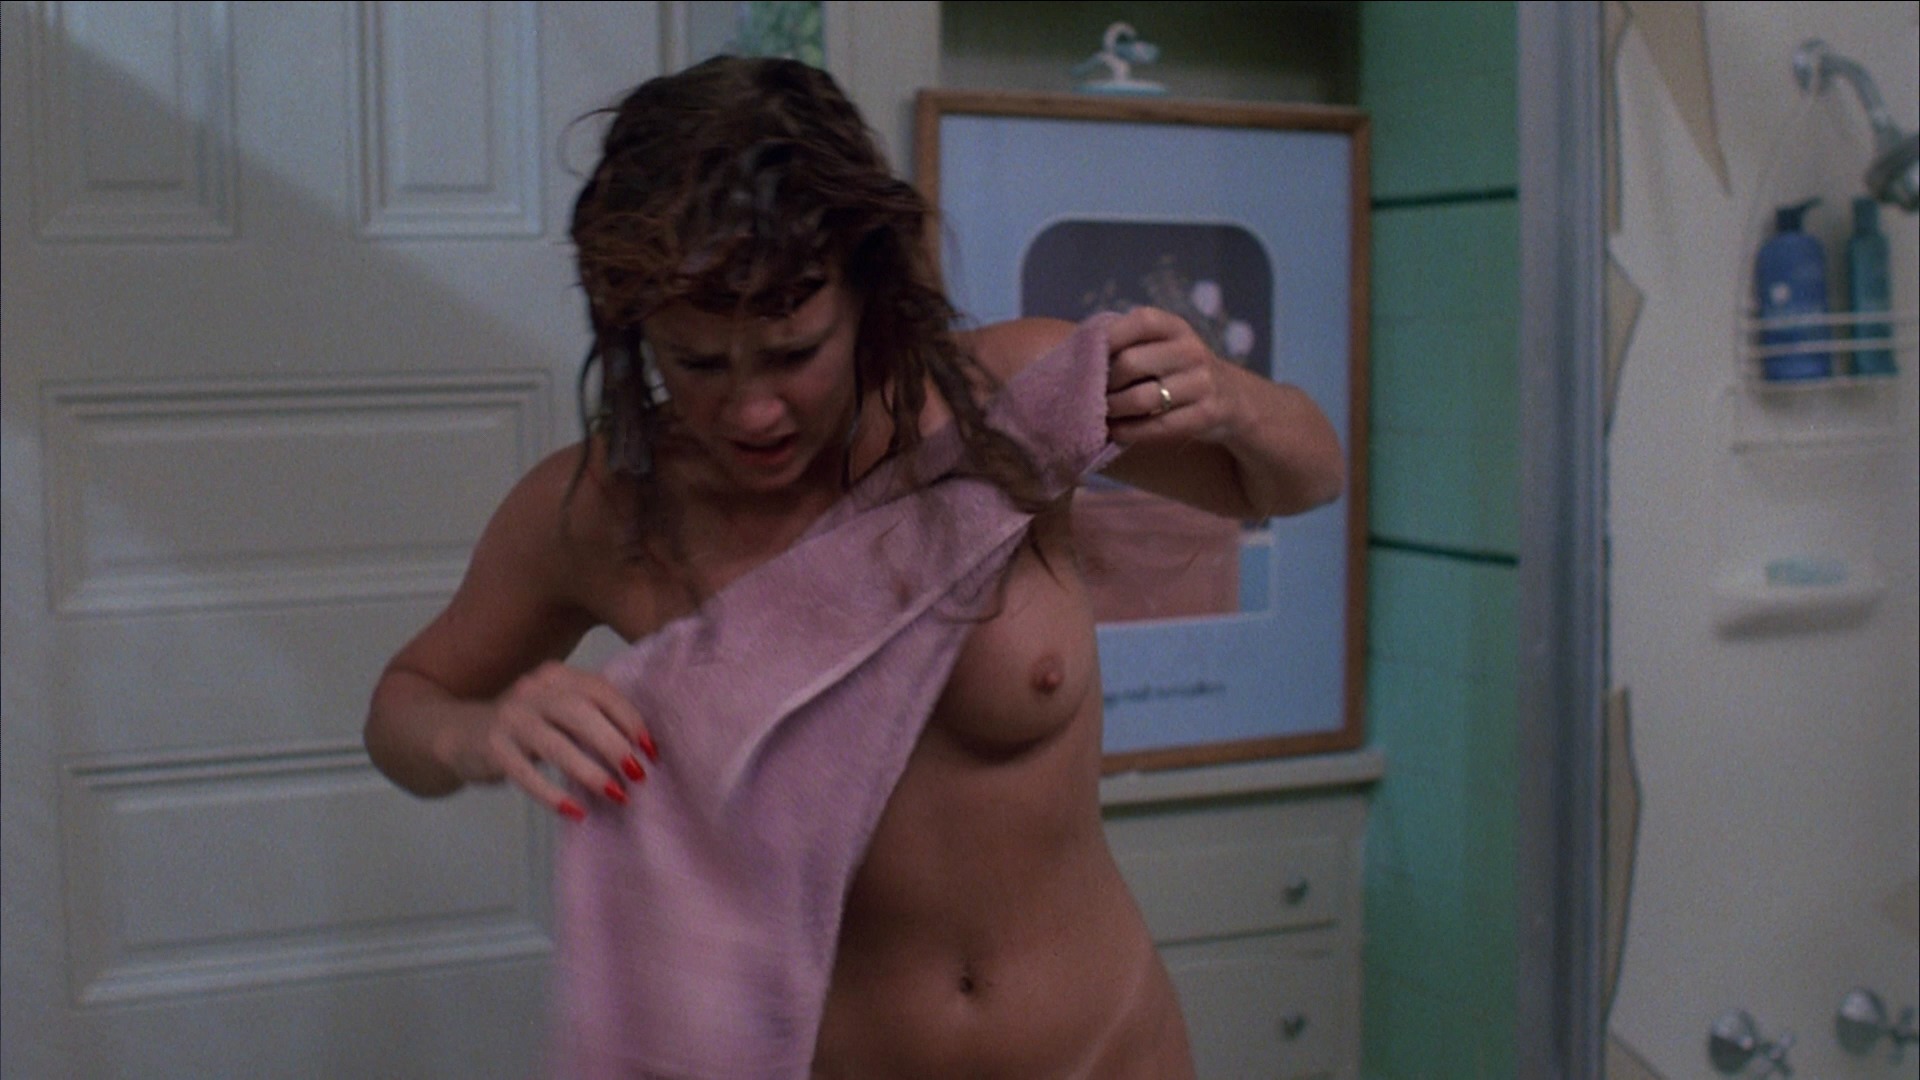 Tawny Kitaen #stripping topless in the bathroom. stripping nude celebrity. 